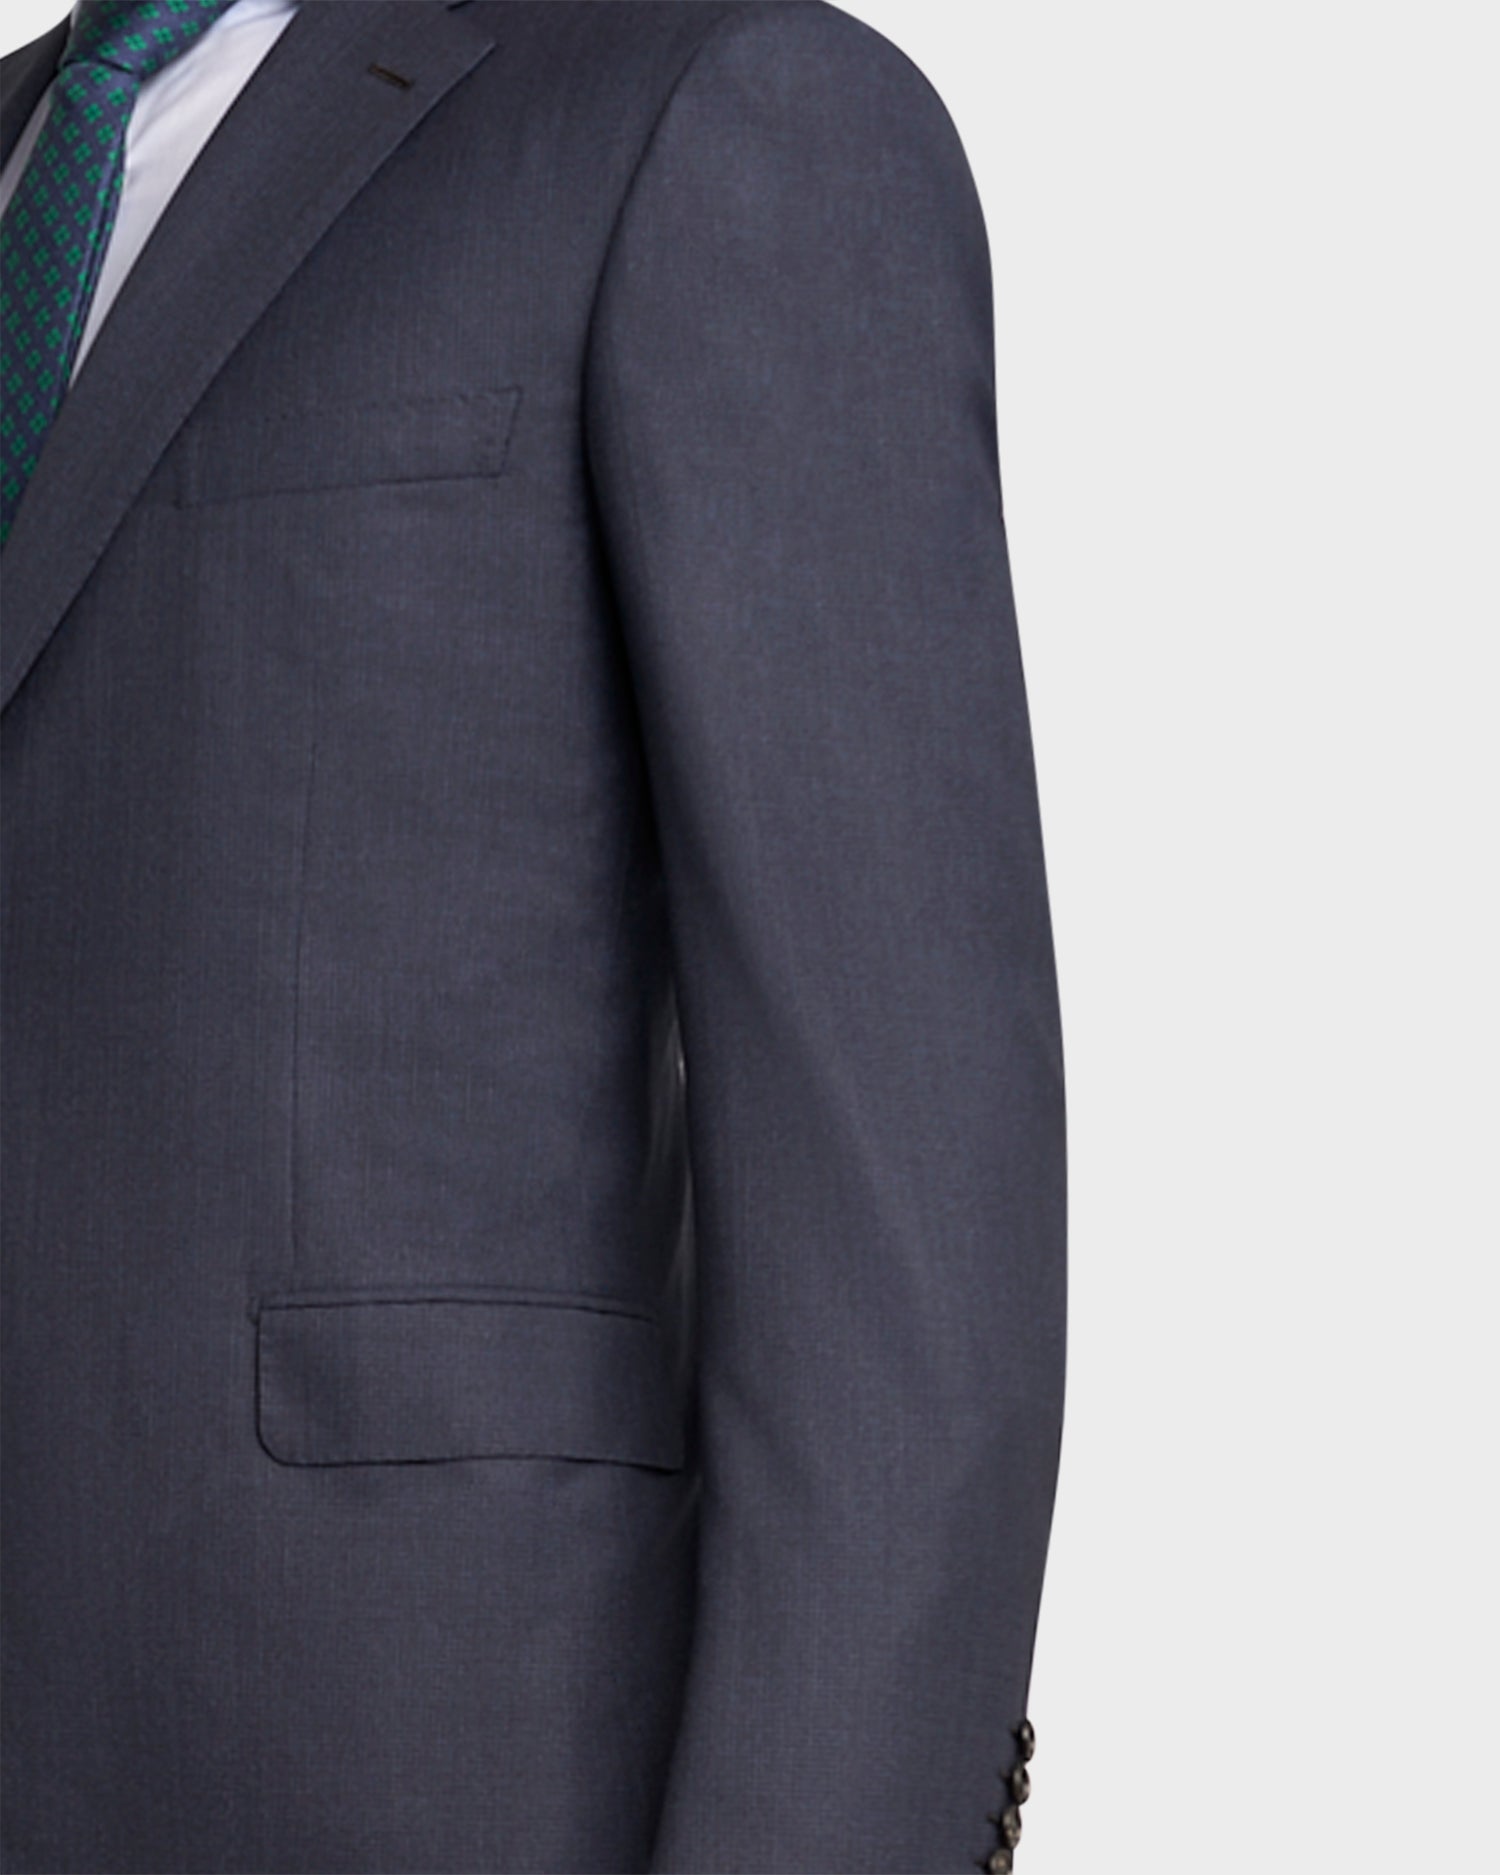 Blue Microcheck Pure Wool Suit